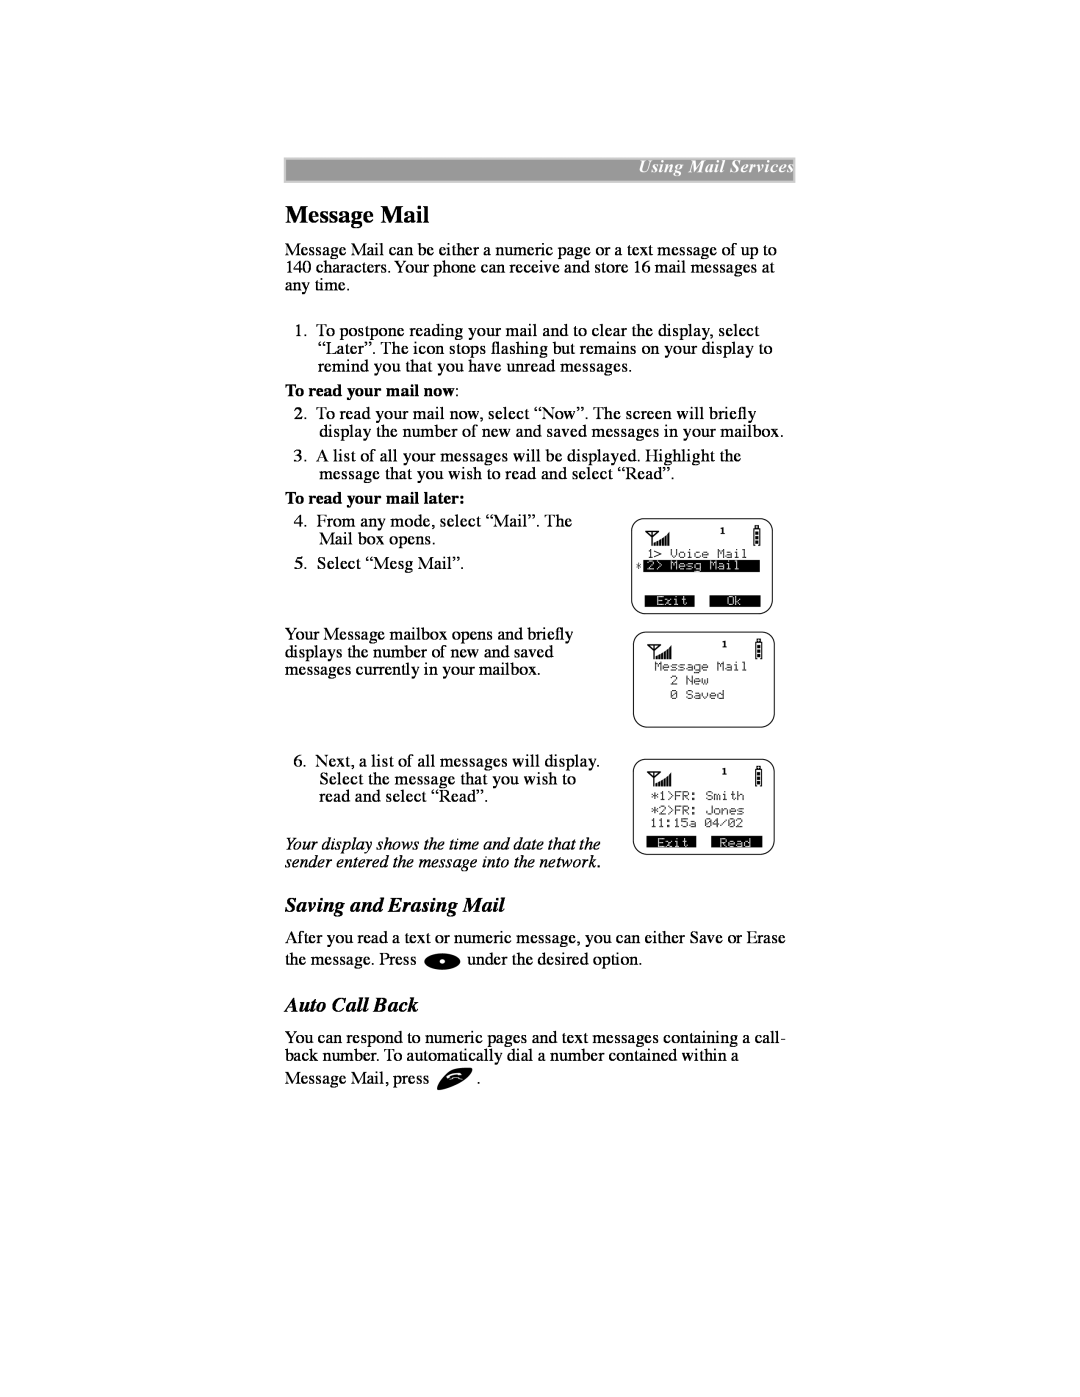 Motorola iDEN manual Message Mail, Saving and Erasing Mail, Auto Call Back, Using Mail Services, To read your mail now 